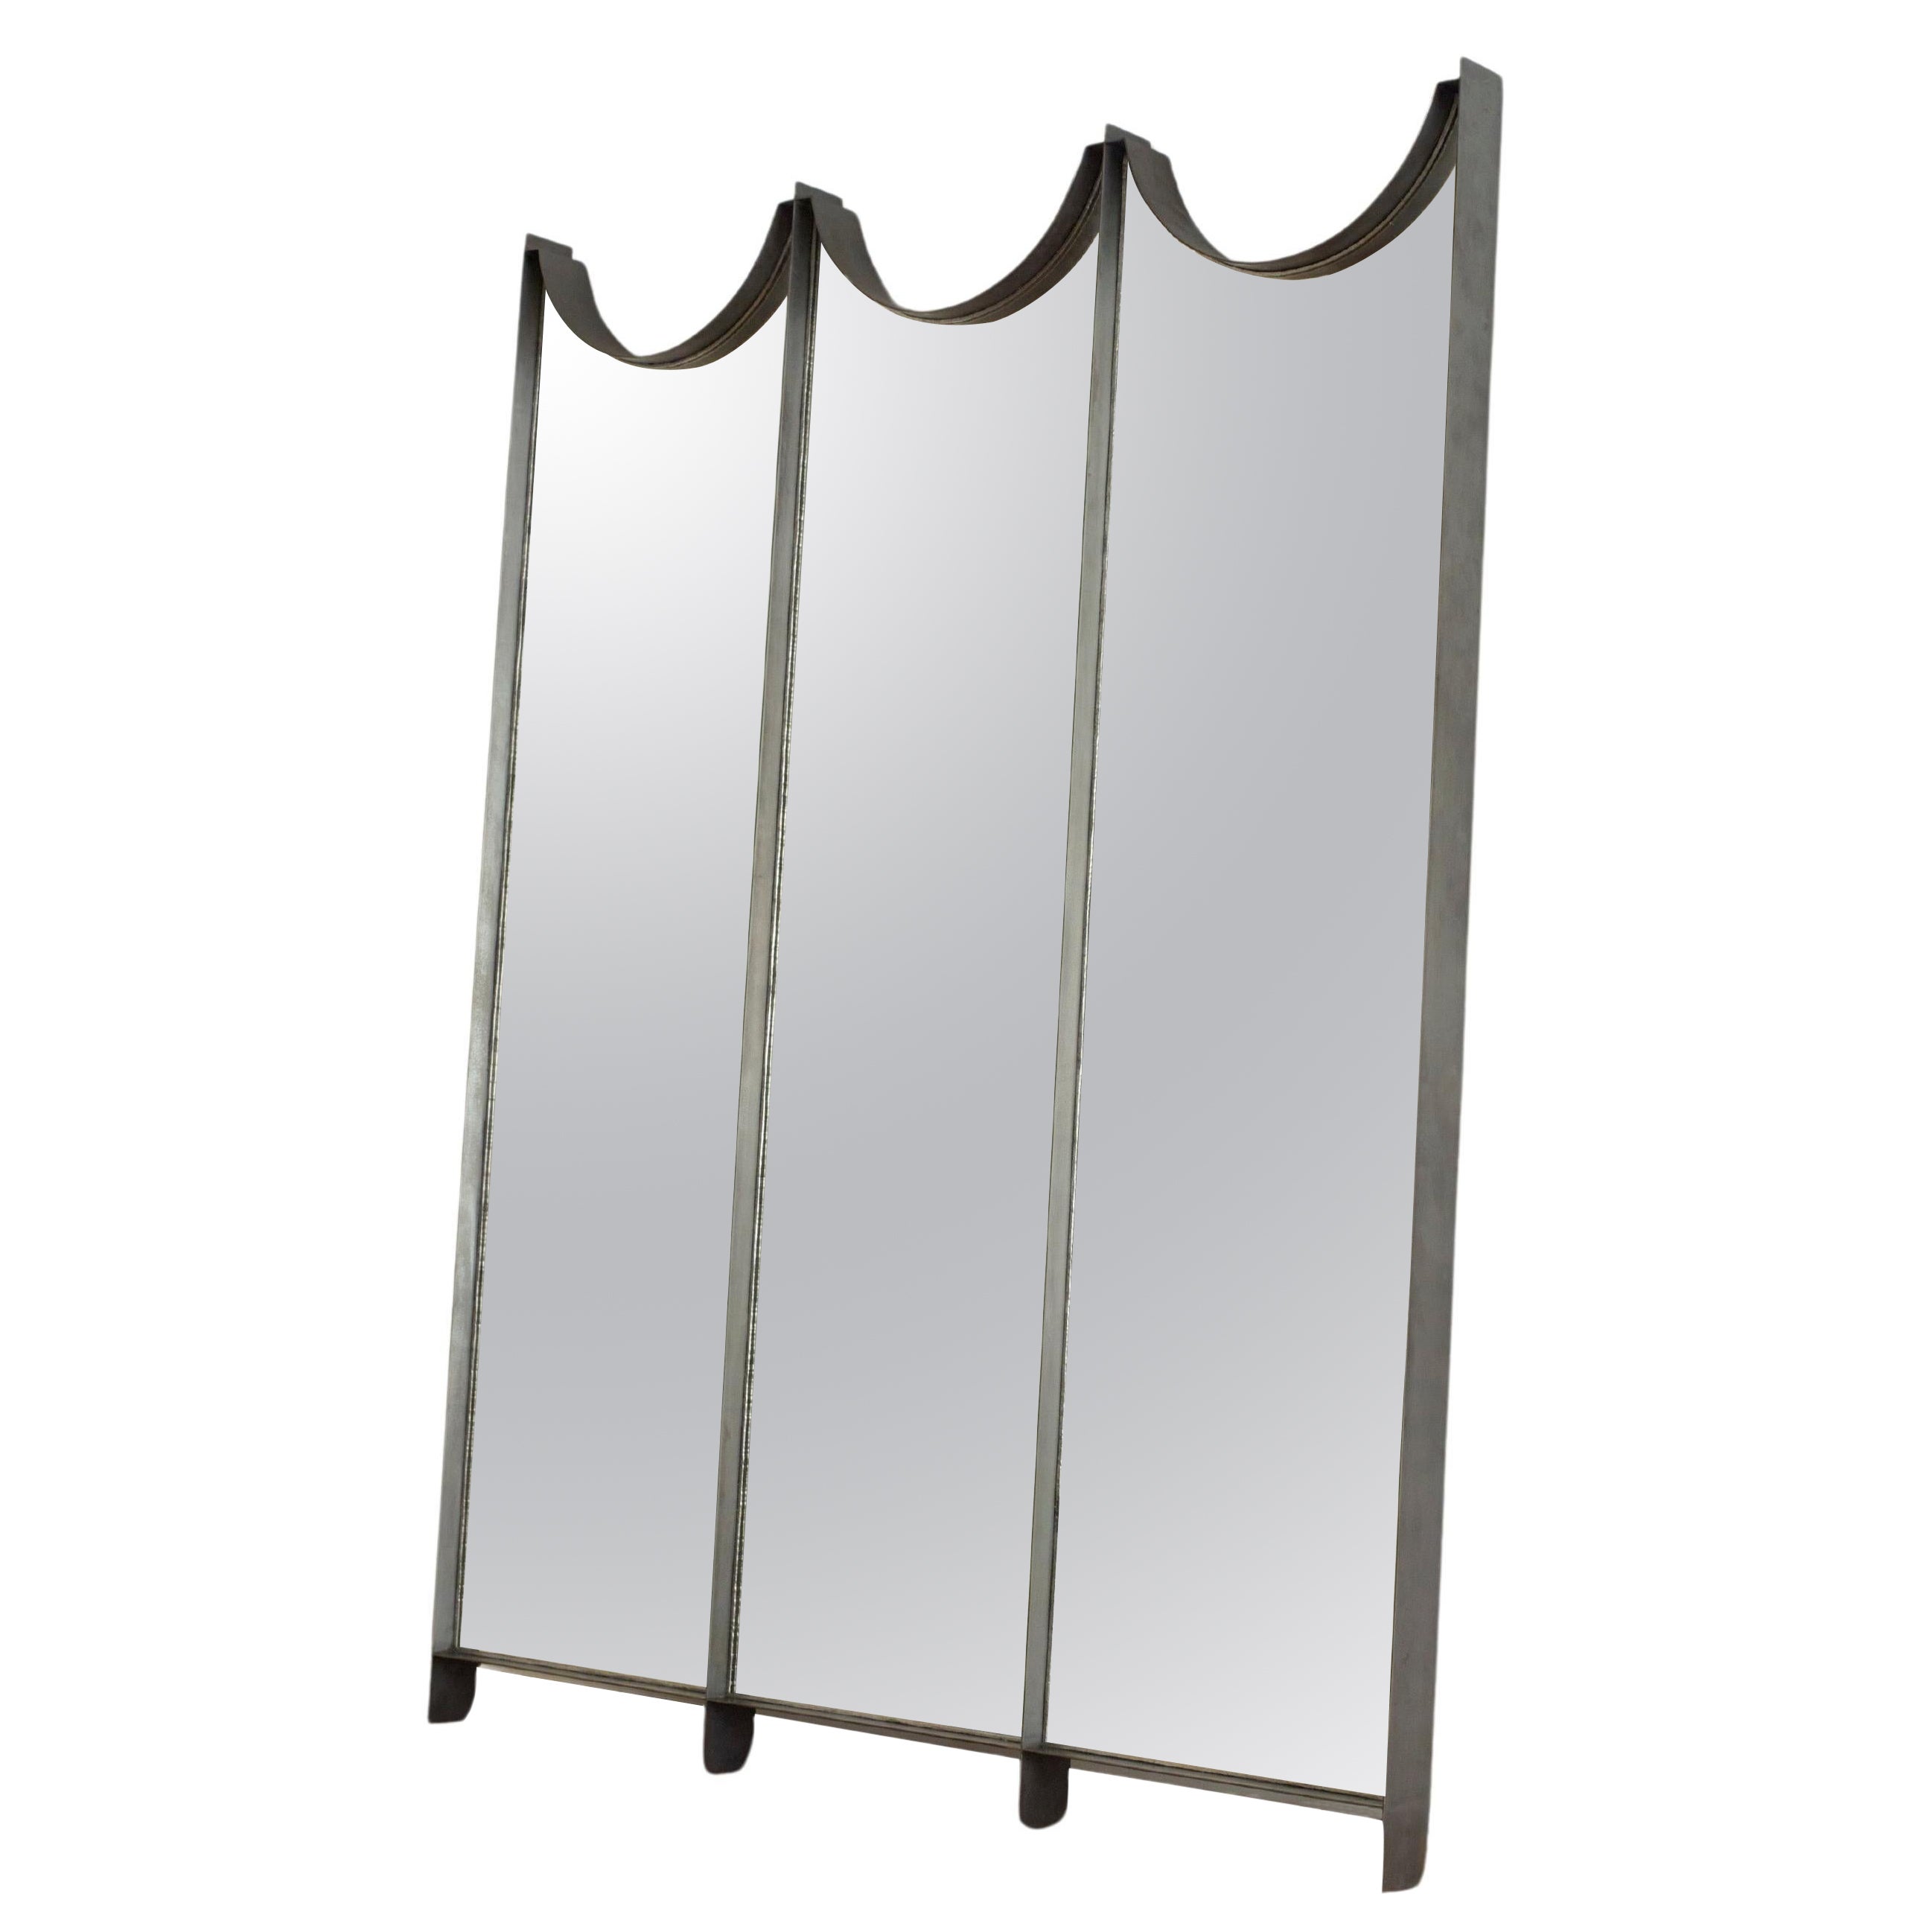 Large, Floor Standing or Wall Leaning 3-Panel Full-Length Mirror in Iron Frame